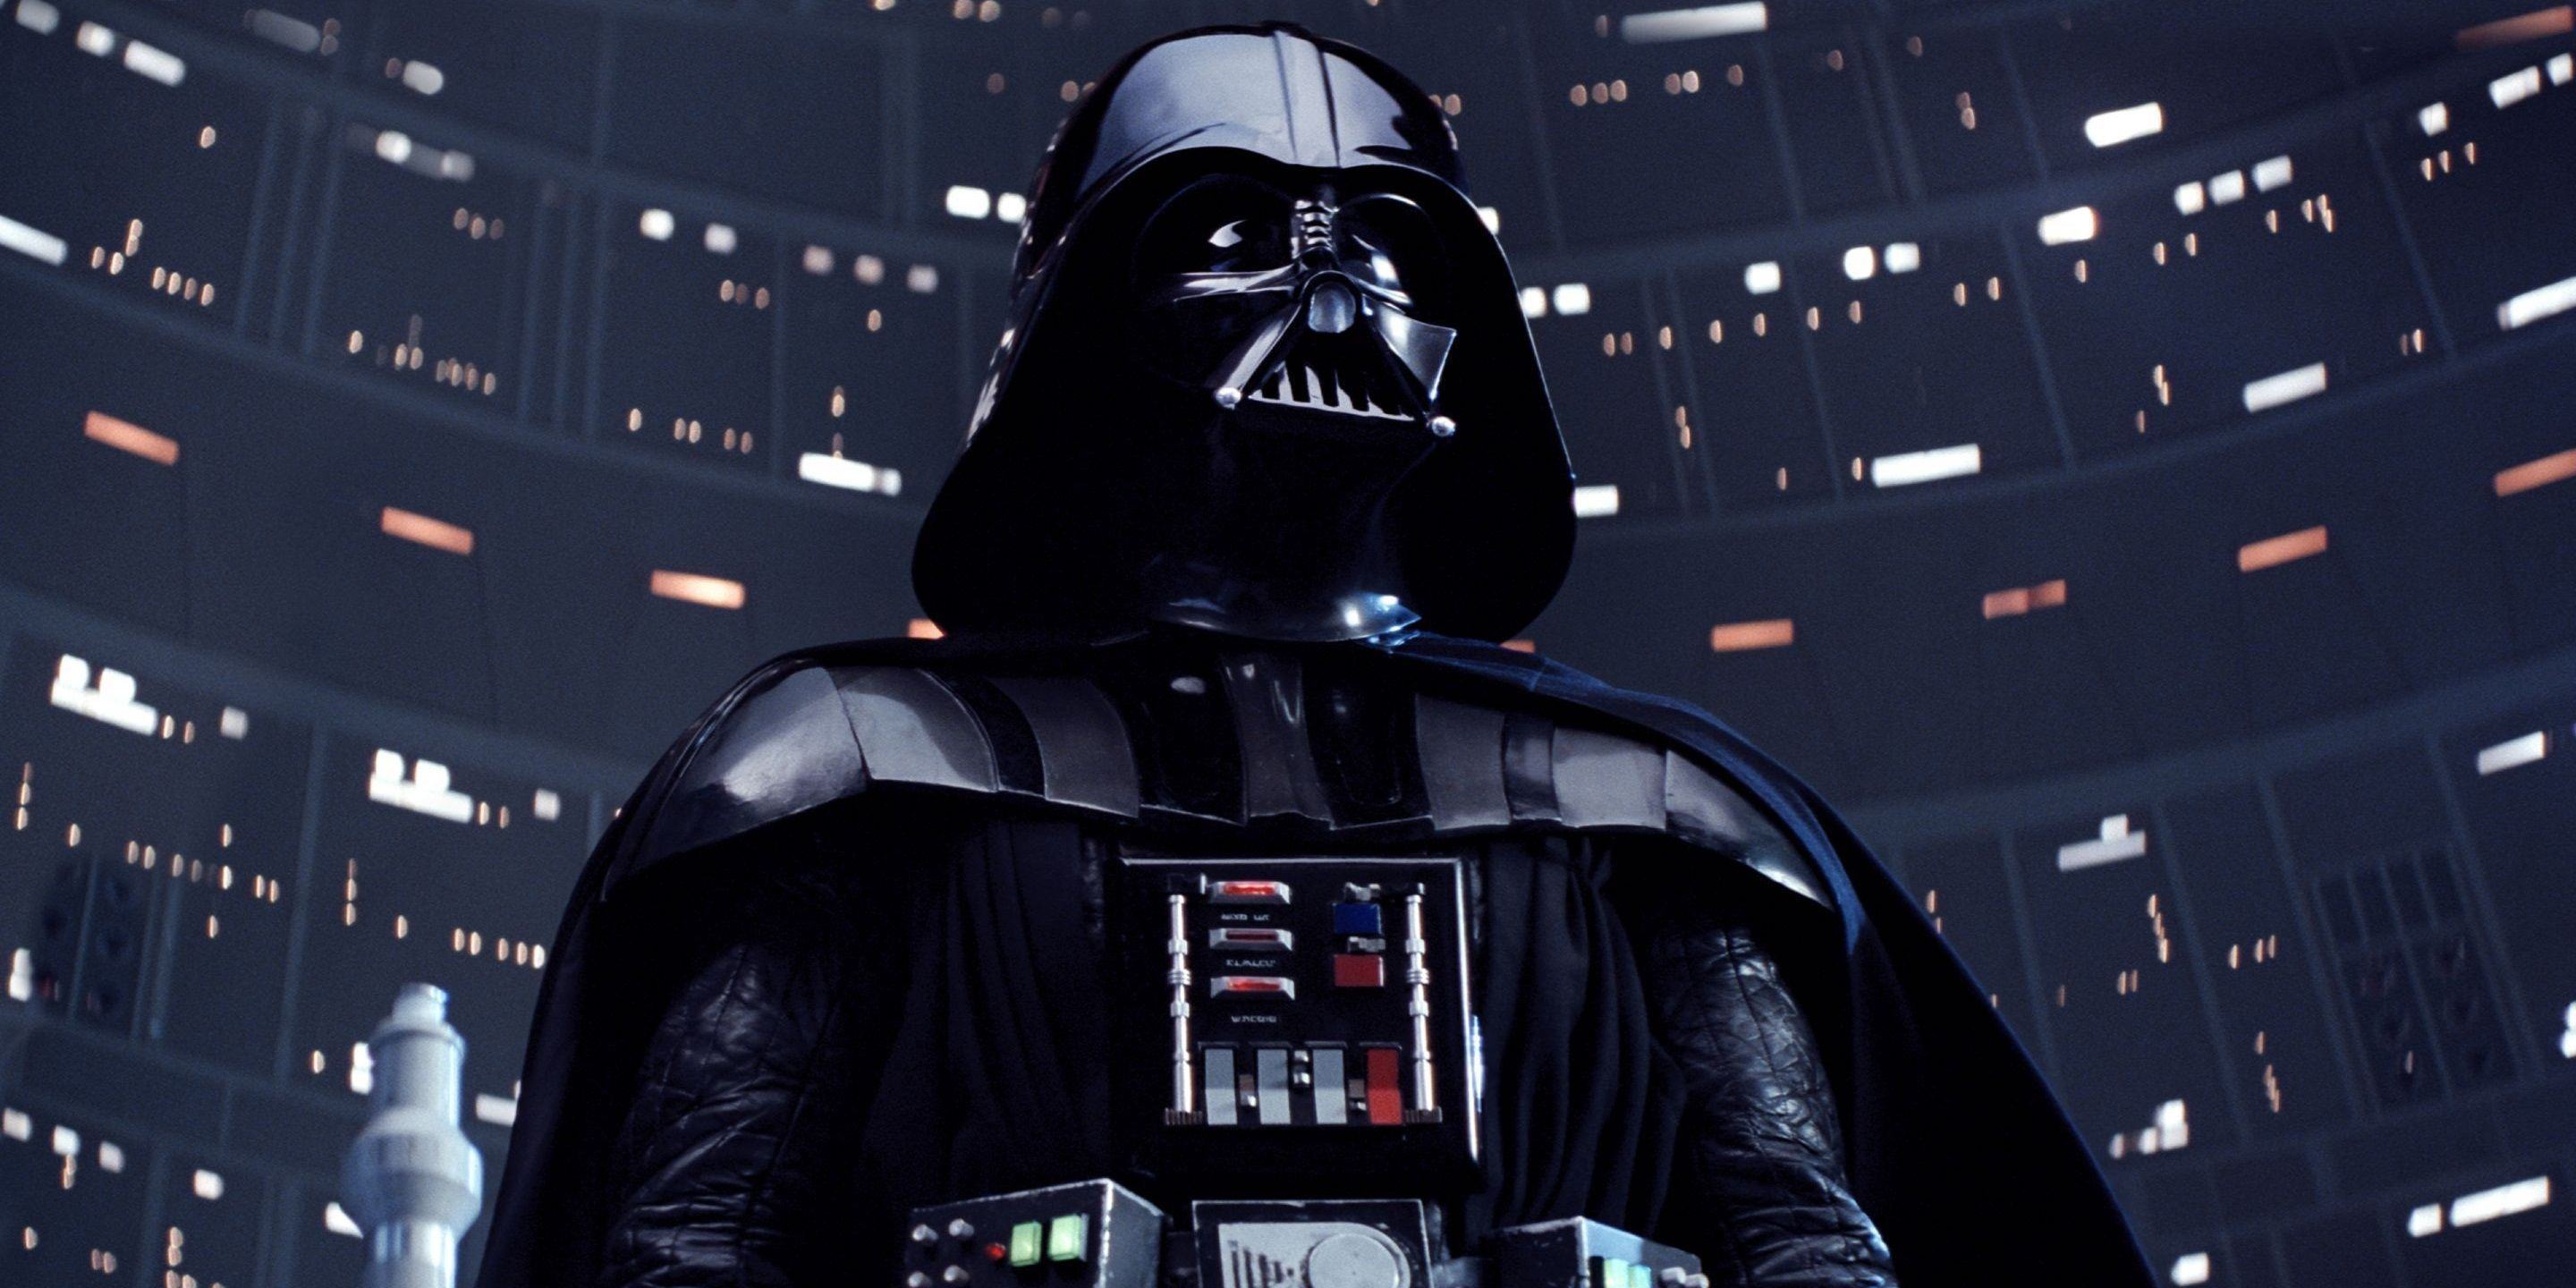 Darth Vader in a low angle shot from The Empire Strikes Back